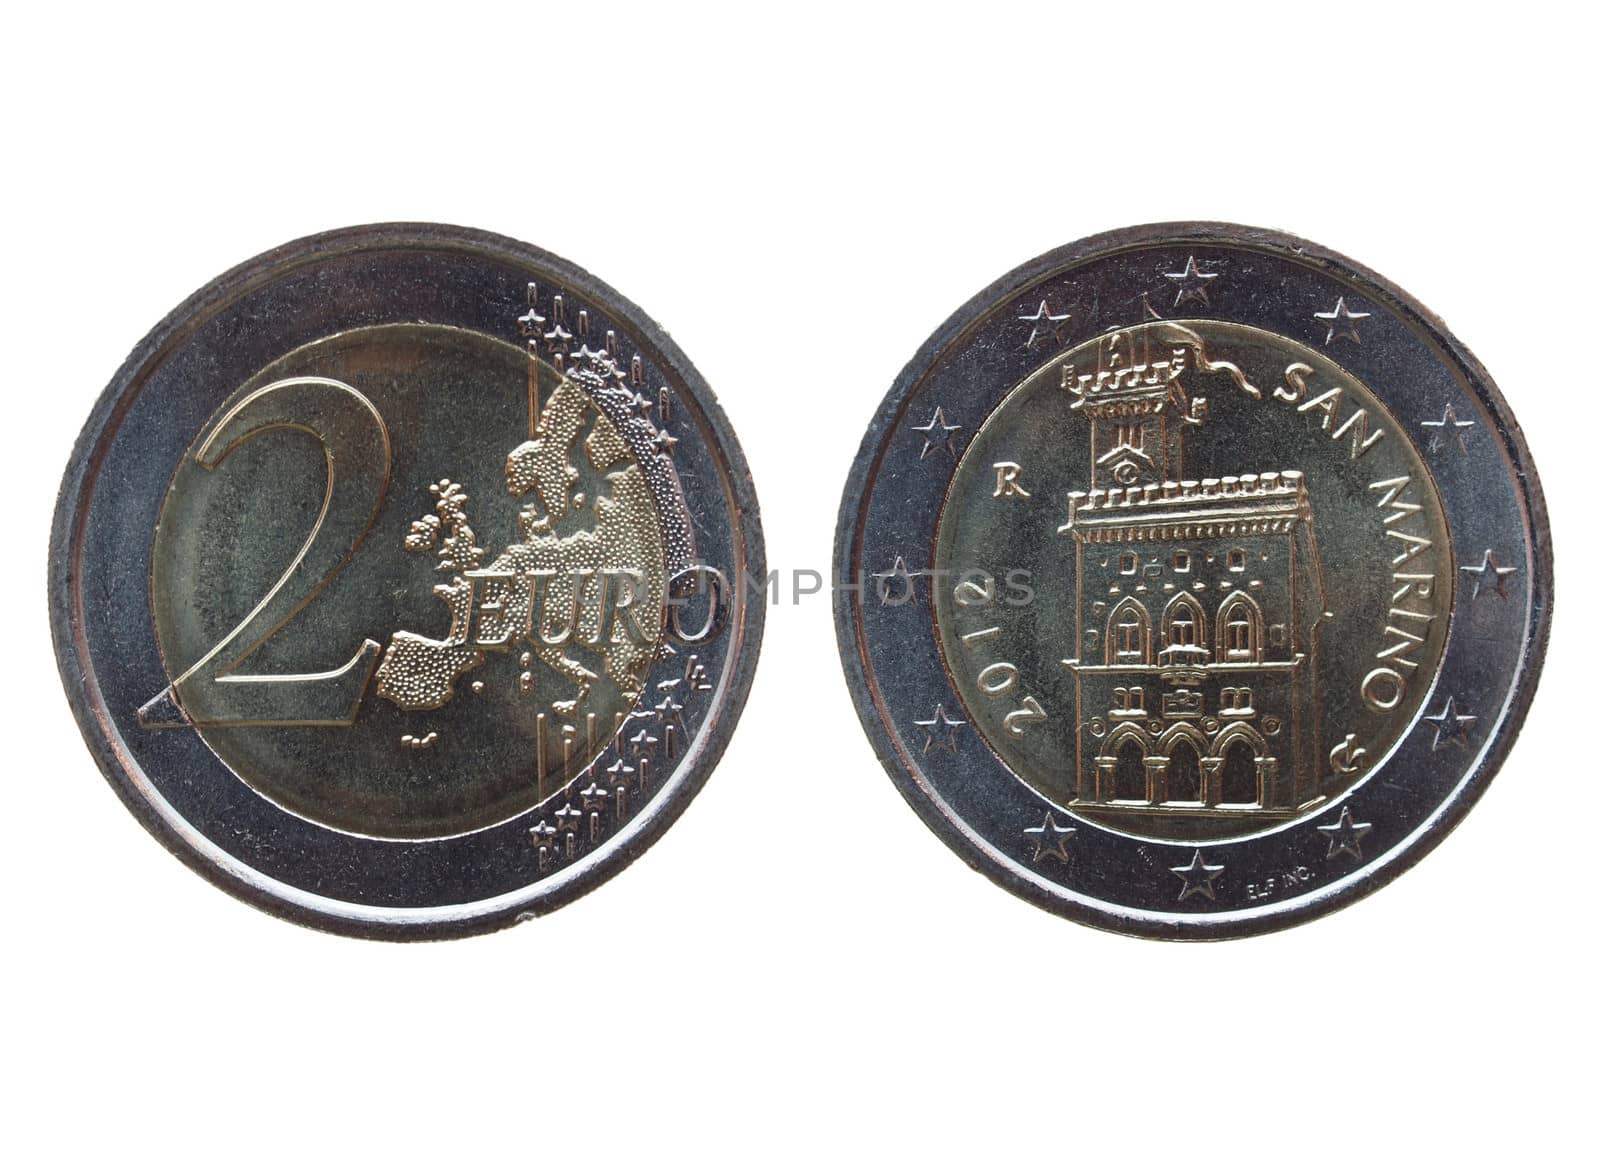 Two euro (EUR) coin from San Marino by paolo77